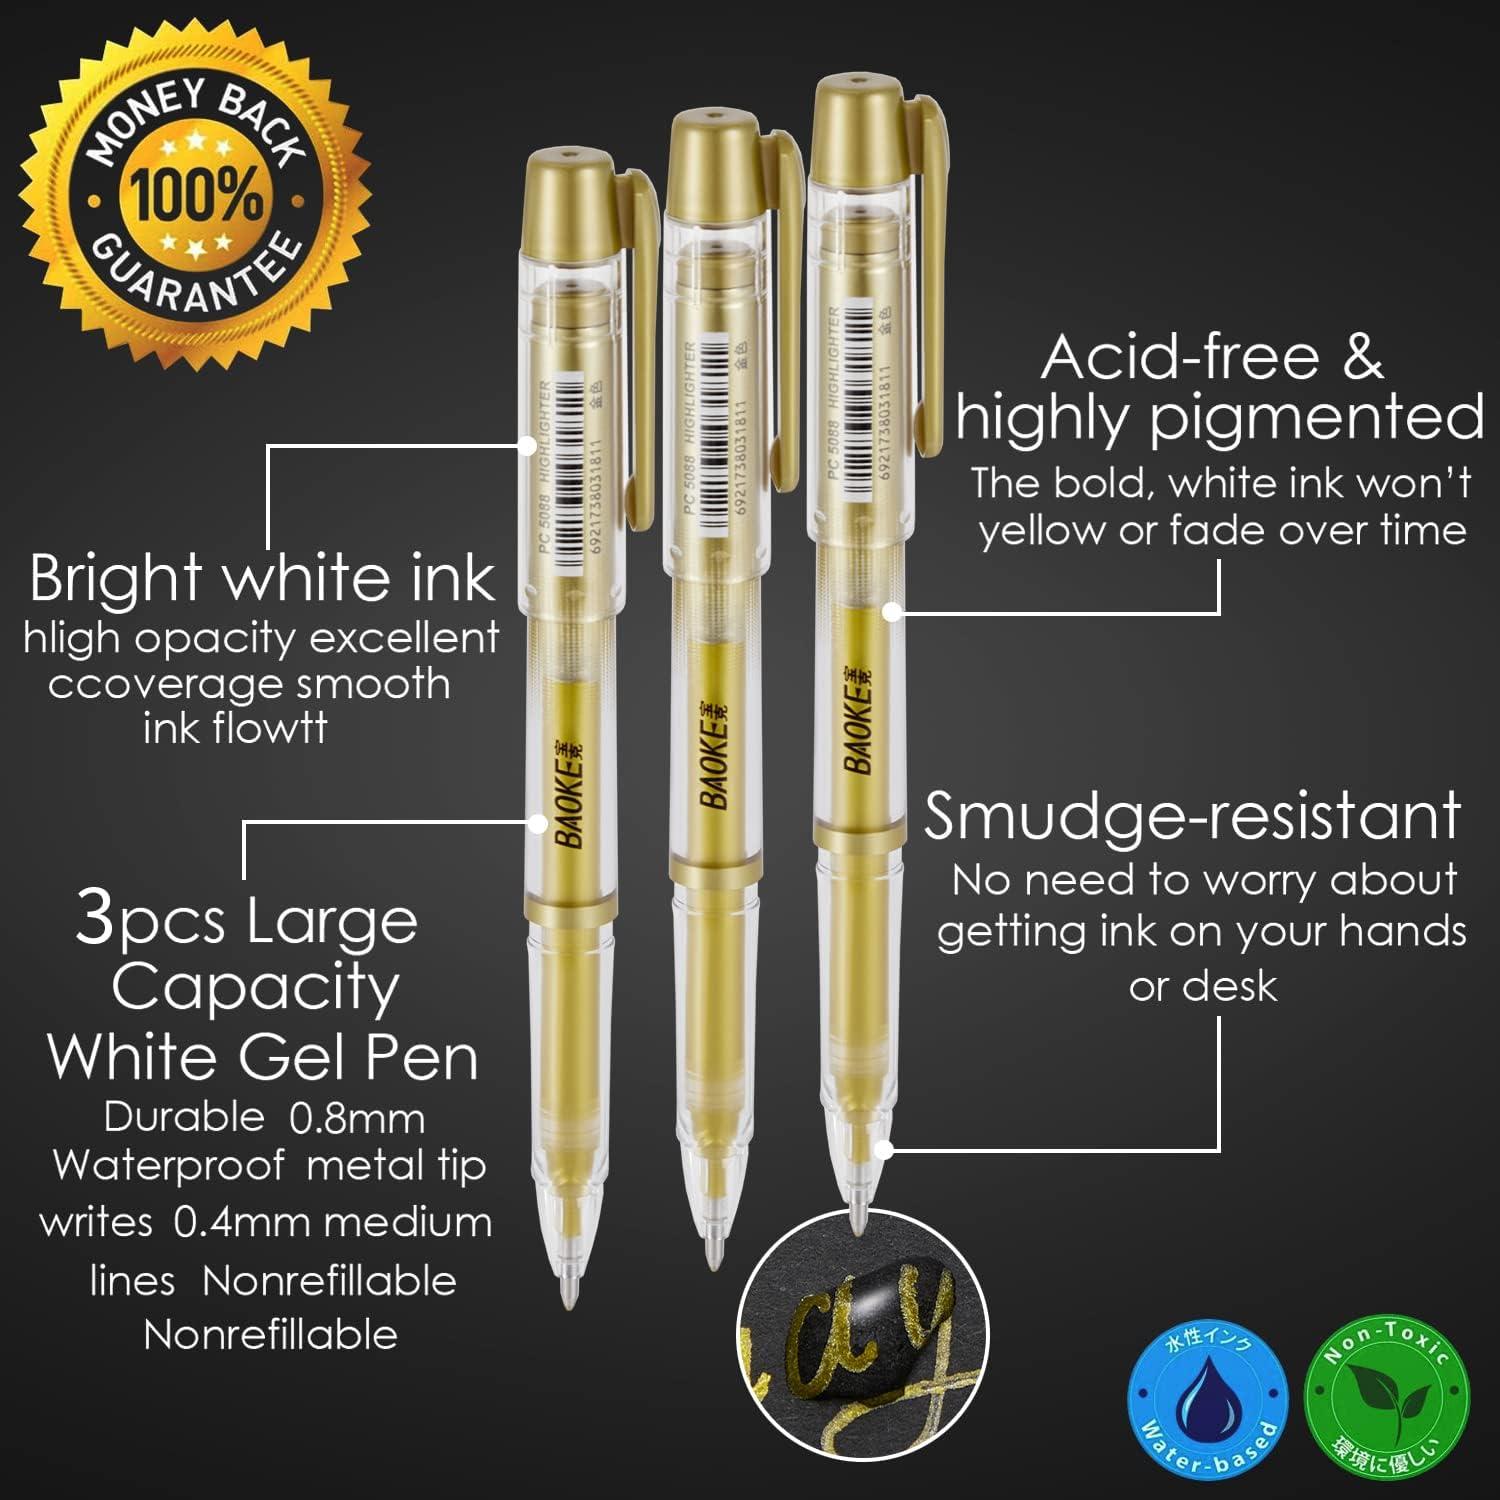 Qionew Gold Gel Pens 3 Pack 1mm Extra Fine Point Pens Gel Ink Pens Opaque  White Archival Ink Pens for Black Paper Drawing Sketching Illustration Card  Making Bullet Journaling